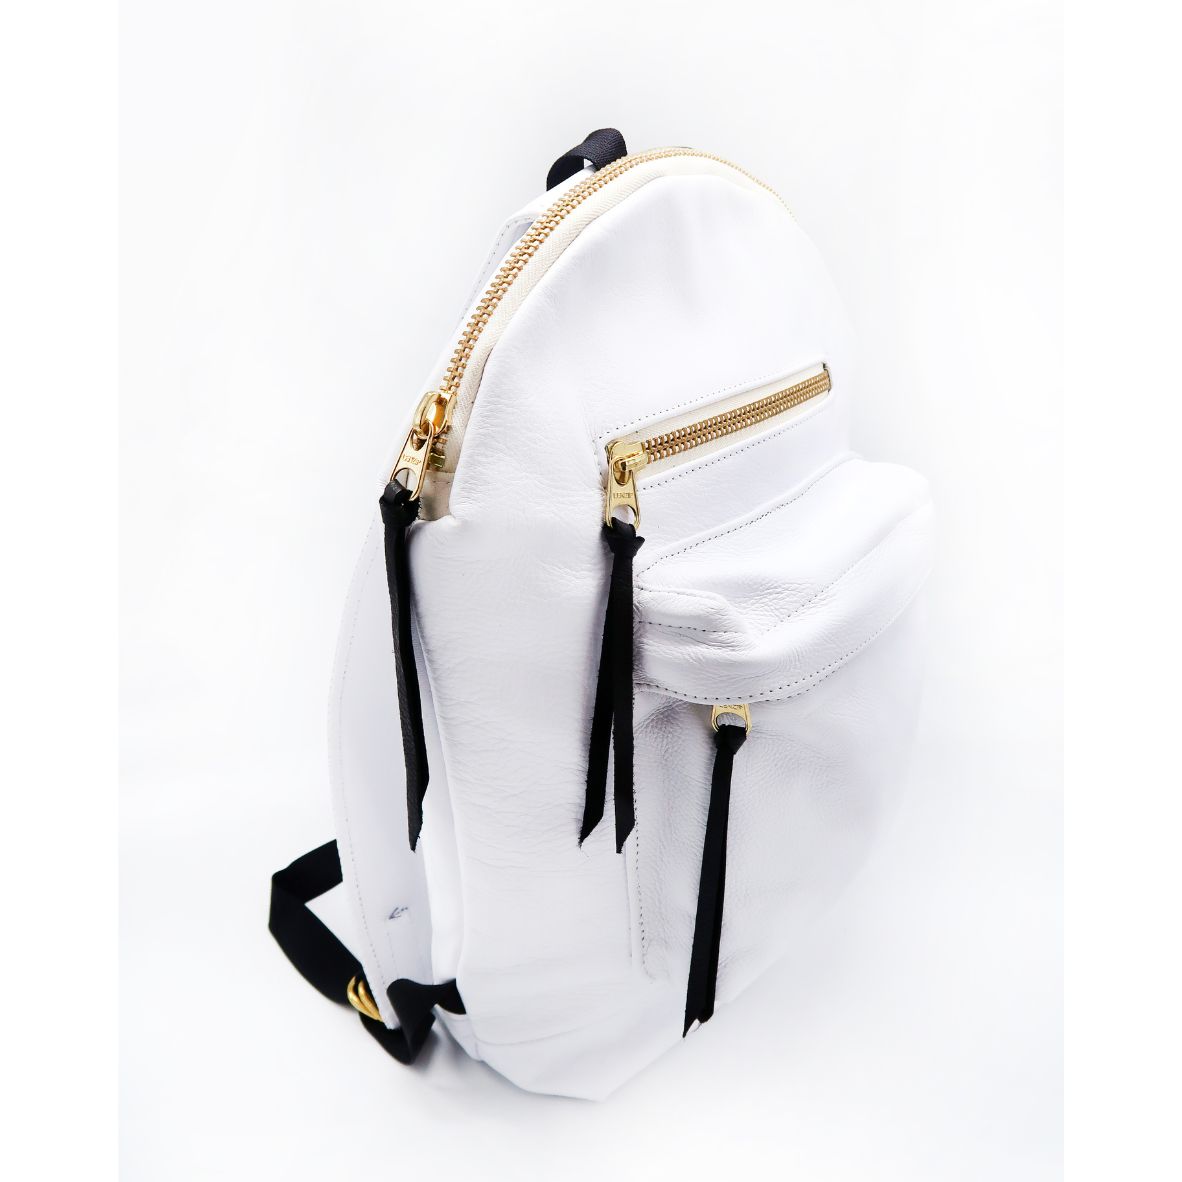 Quinell Noami Backpack